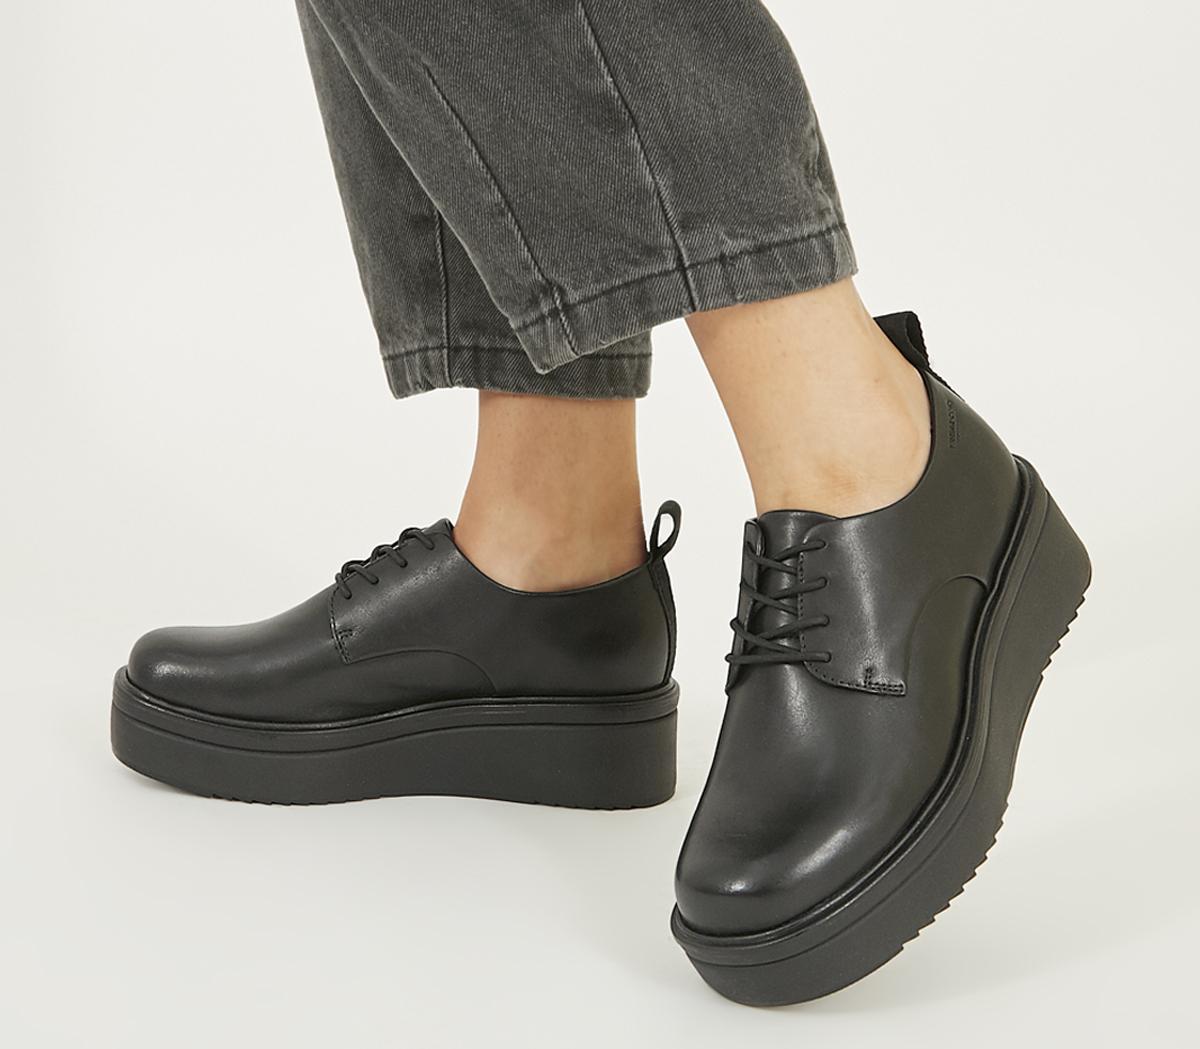 Buy > vagabond office shoes > in stock